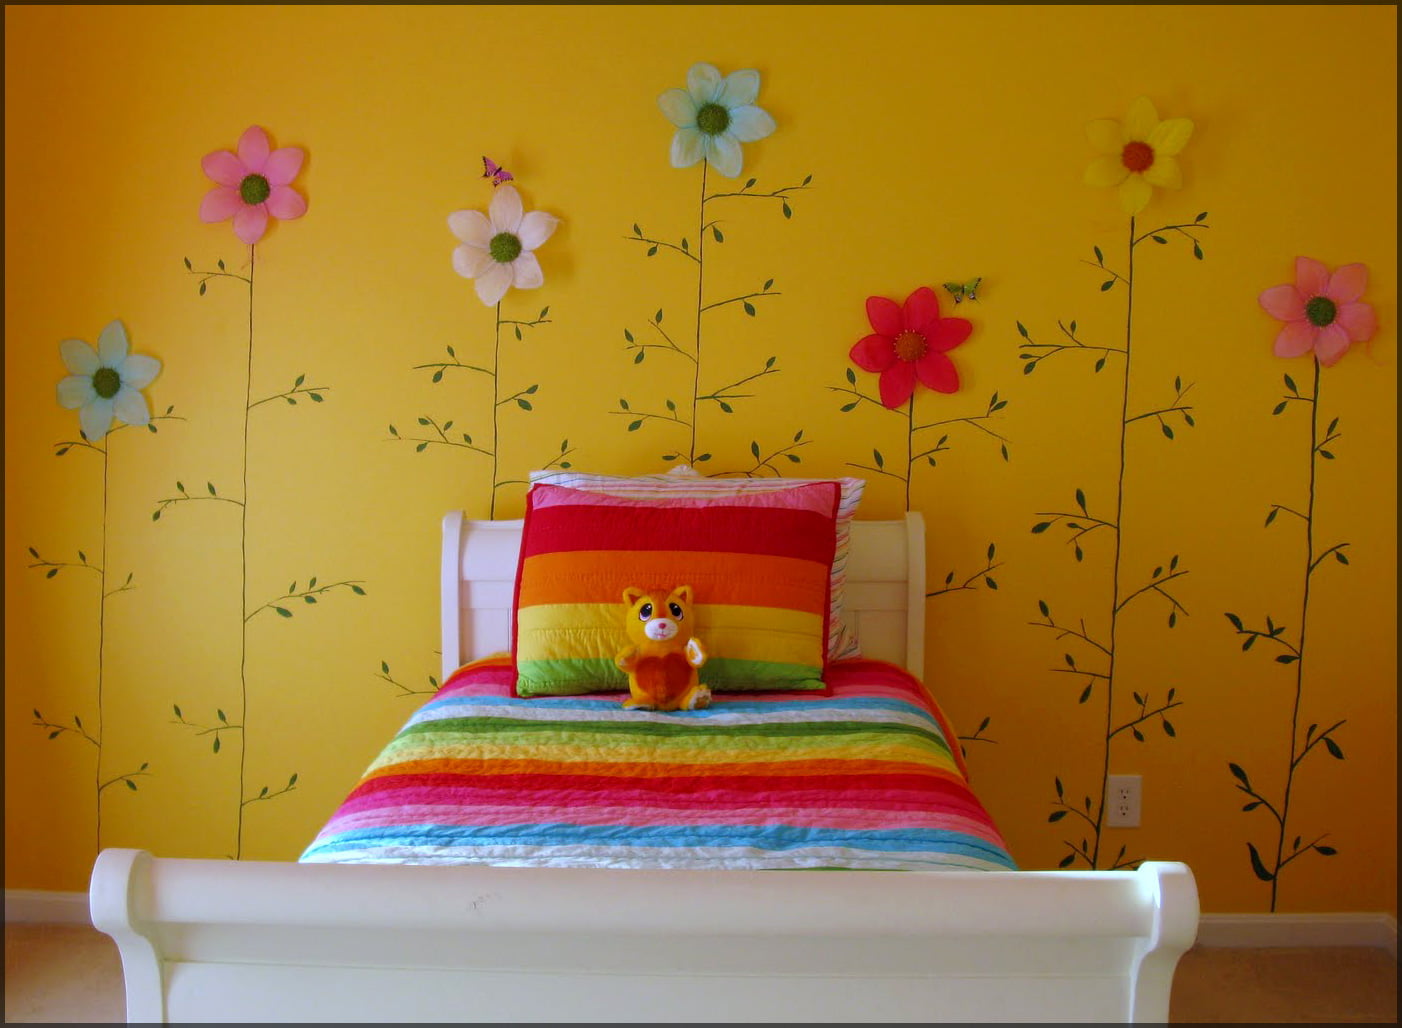 interior-beautiful-orange-wallpaper-scheme-color-with-decorative-emroidered-flower-decor-and-rainbow-theme-bed-sheet-best-choices-color-schemes-for-girls-bedrooms